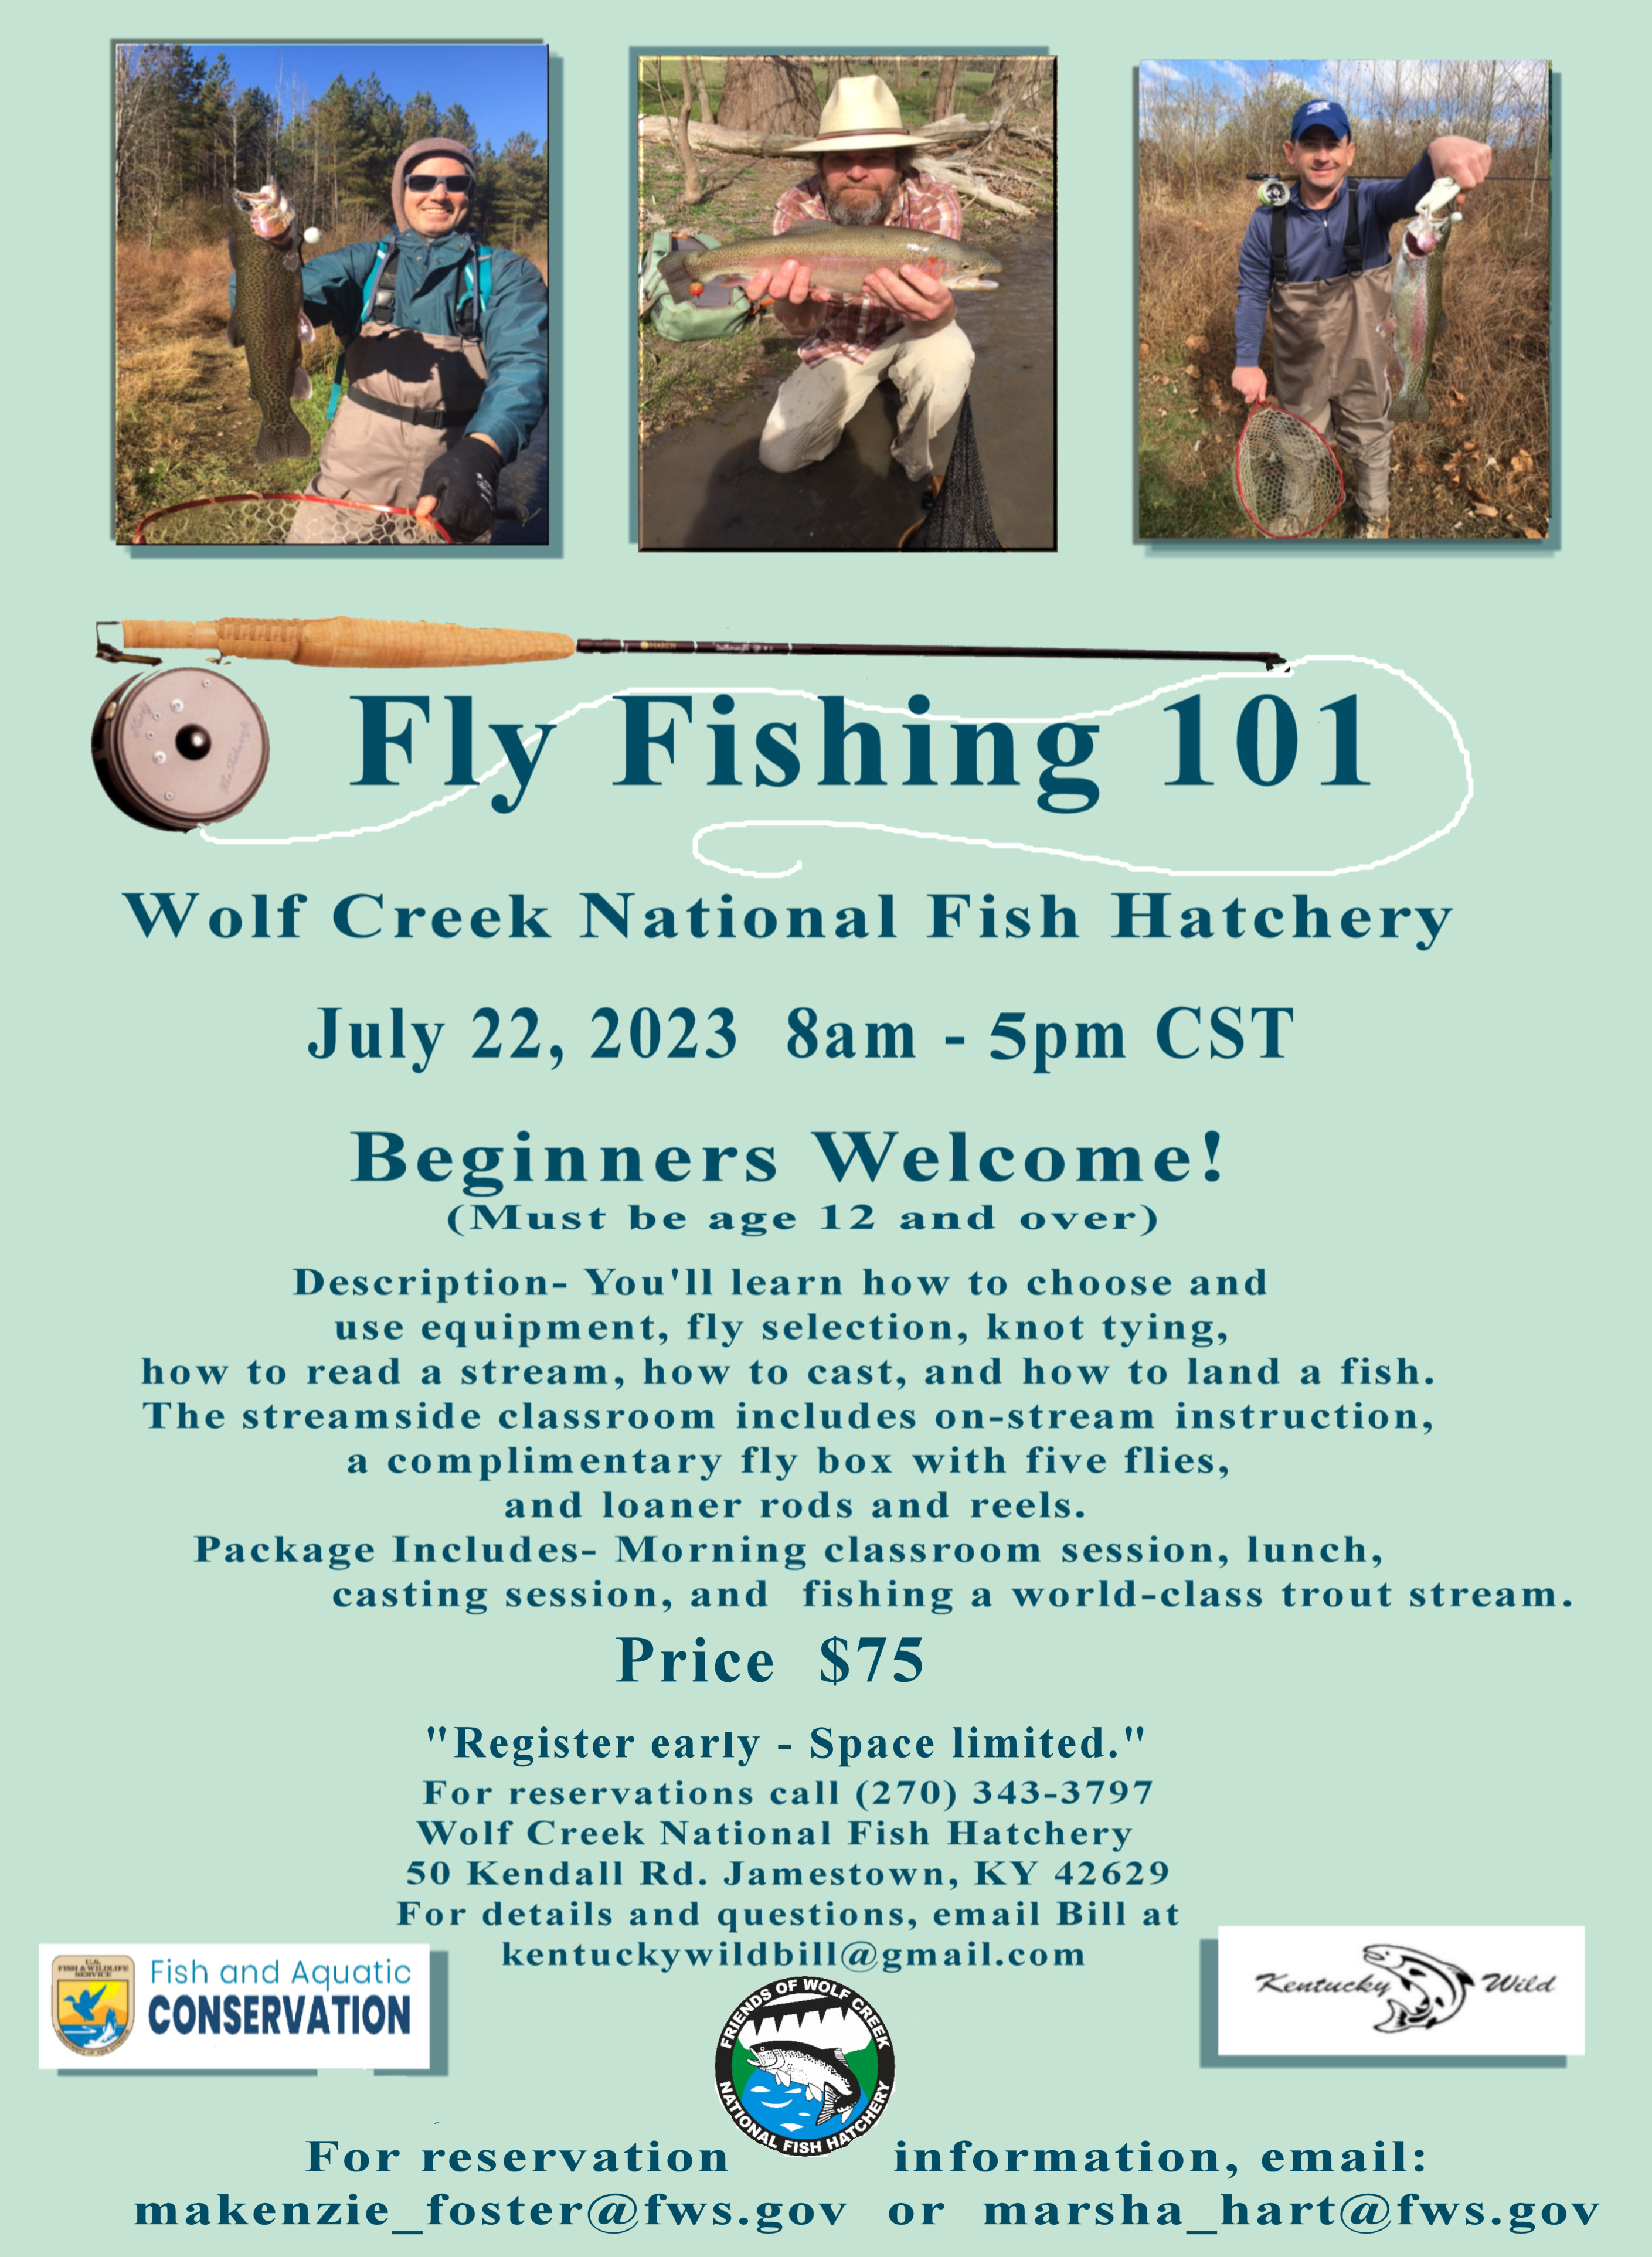 Fly Fishing 101 flyer